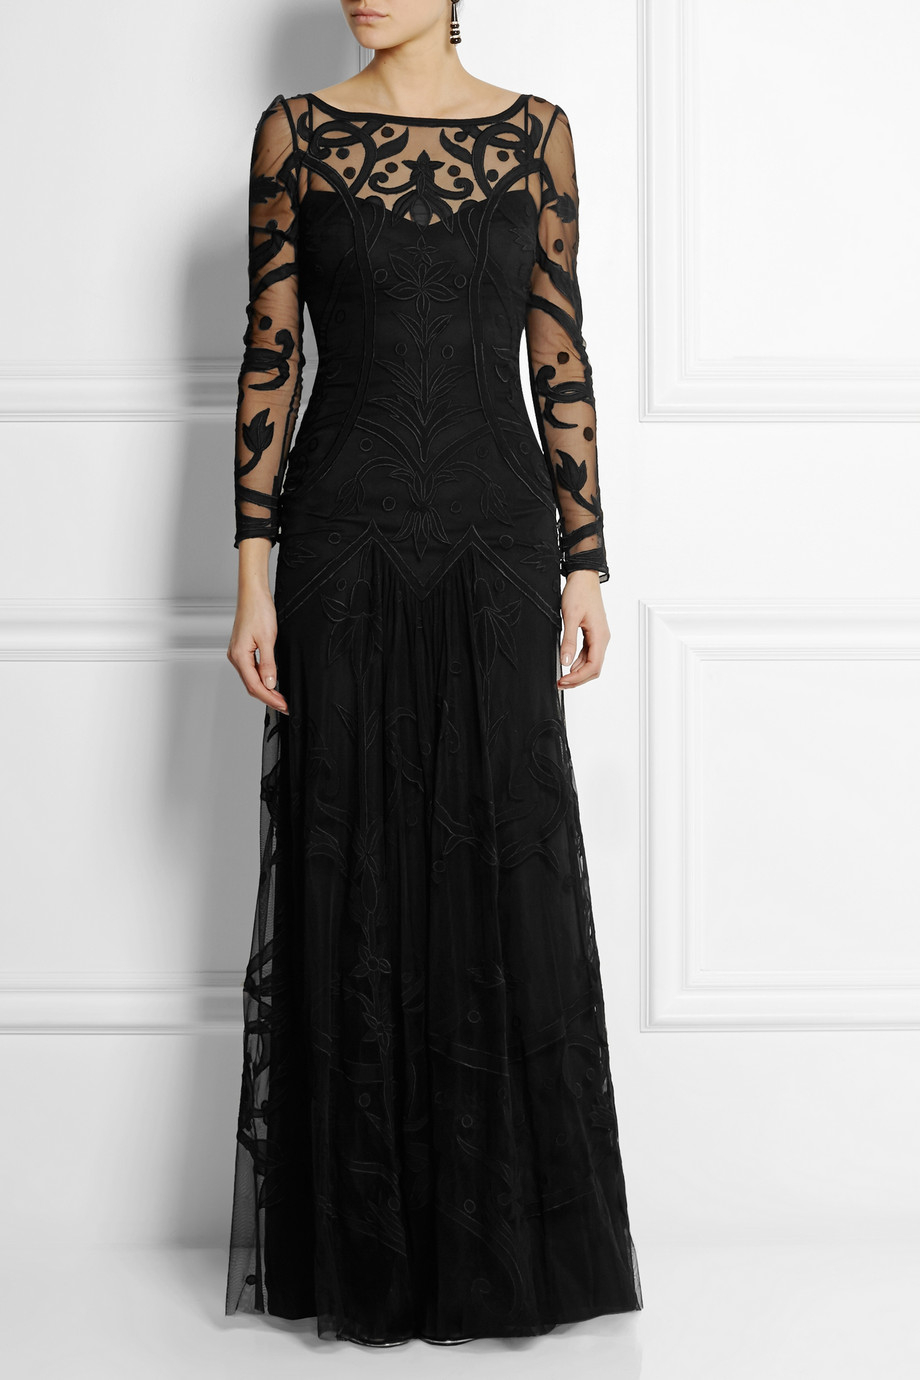 Lyst - Temperley London Francine Embroidered Tulle Gown in Black